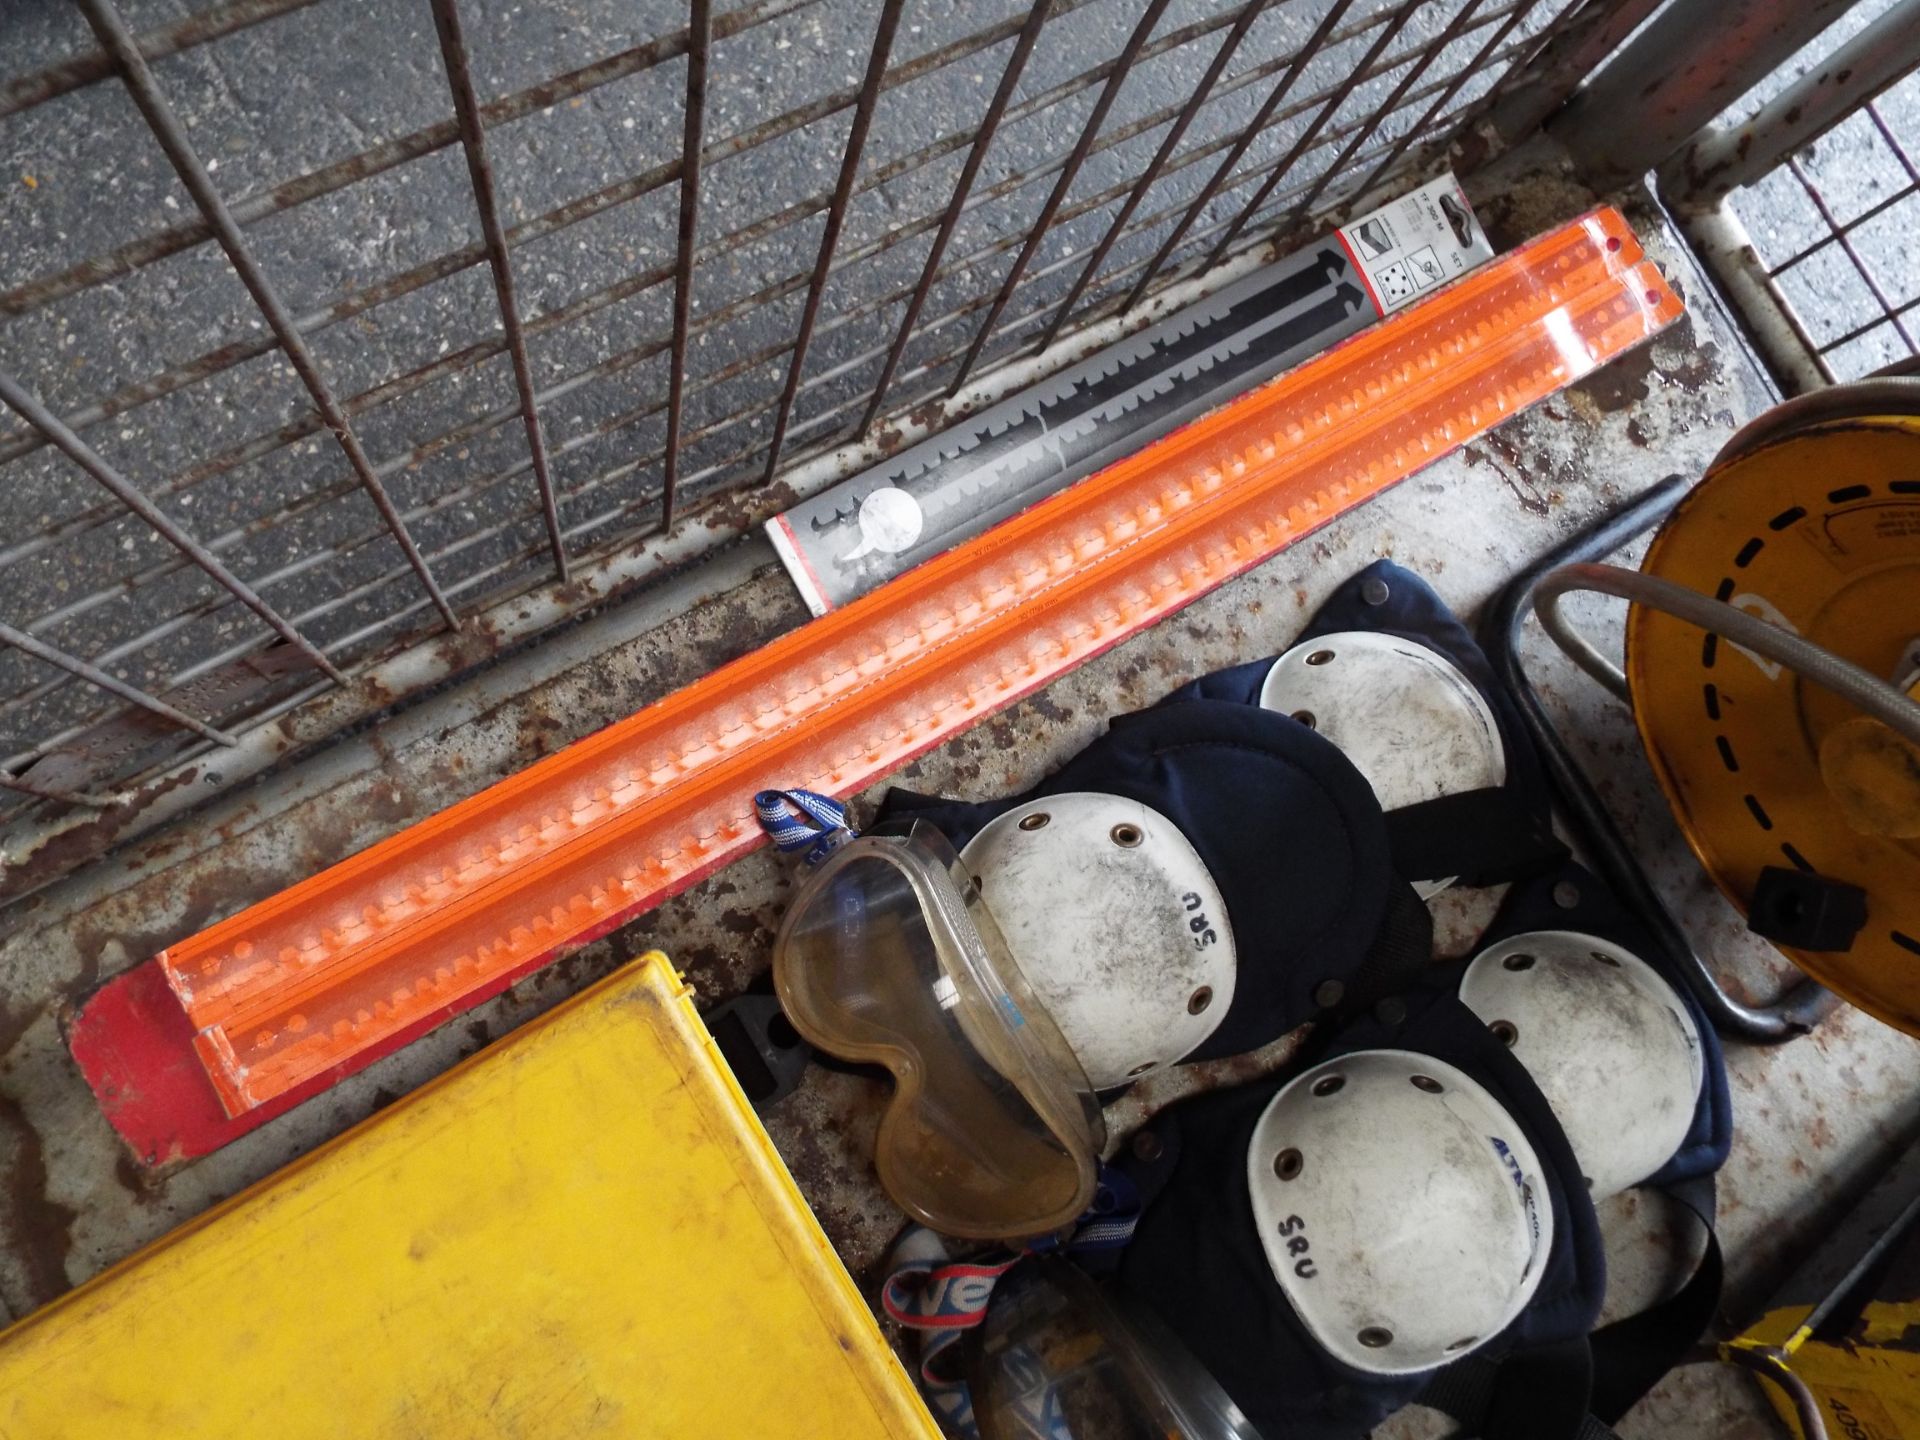 Mixed Stillage of Tools and Equipment inc. Work Platforms, Tools, Safety Equipment Cable Reel etc. - Image 6 of 8